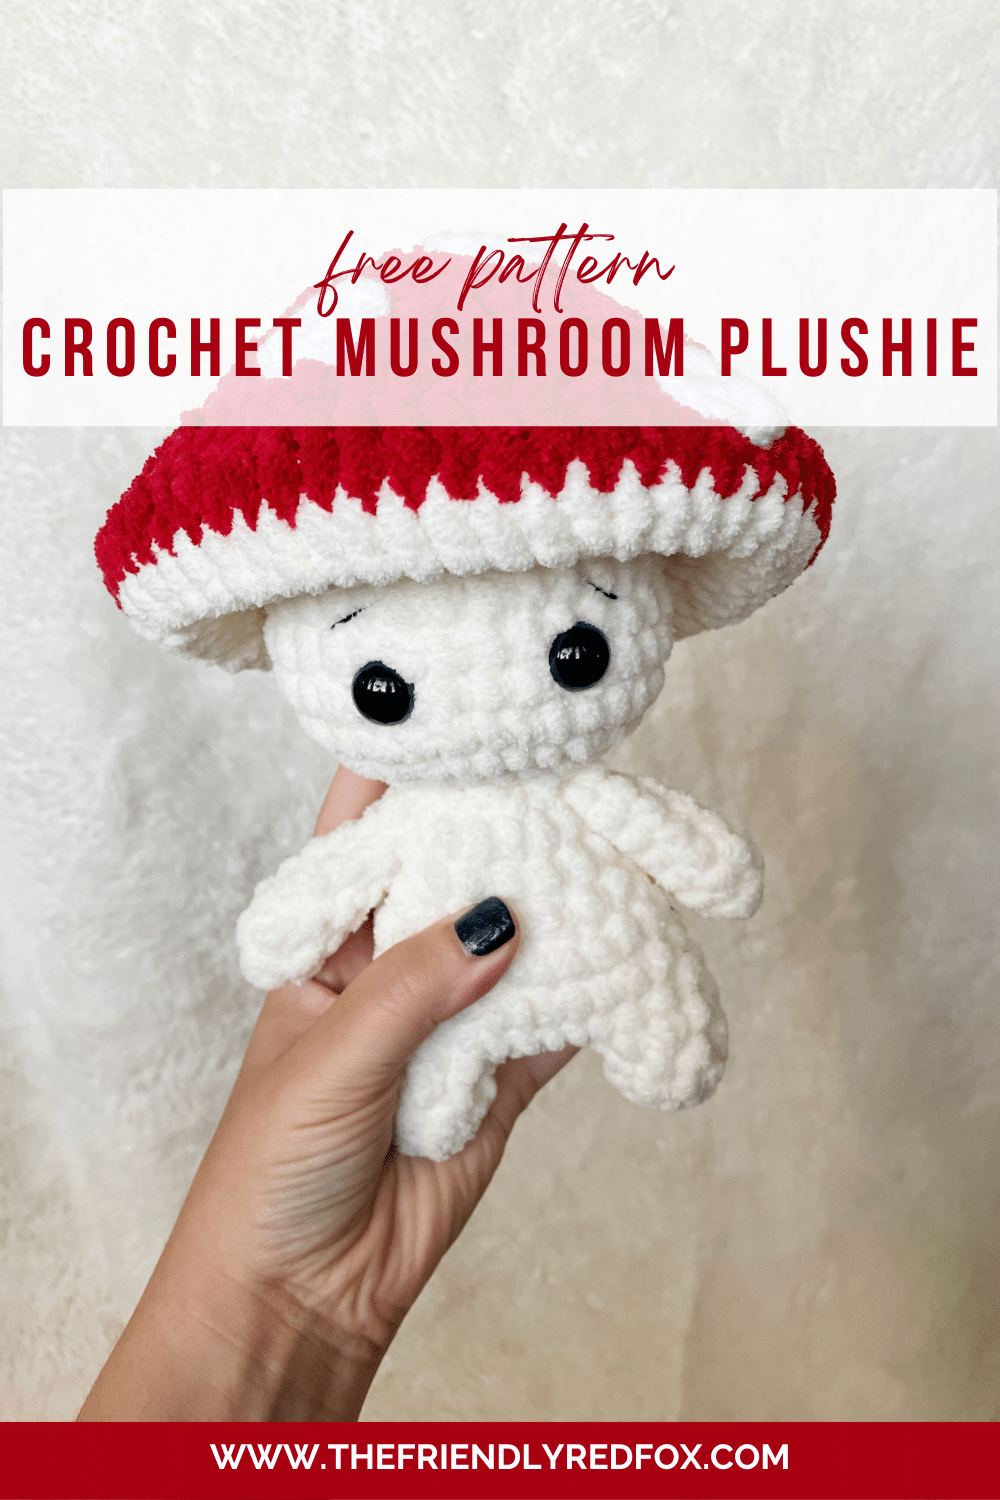 This free Crochet Mushroom Pattern will create a whimsical little friend. There is something irresistable about this amigurumi mushroom! Make a whole forest full with this free pattern!